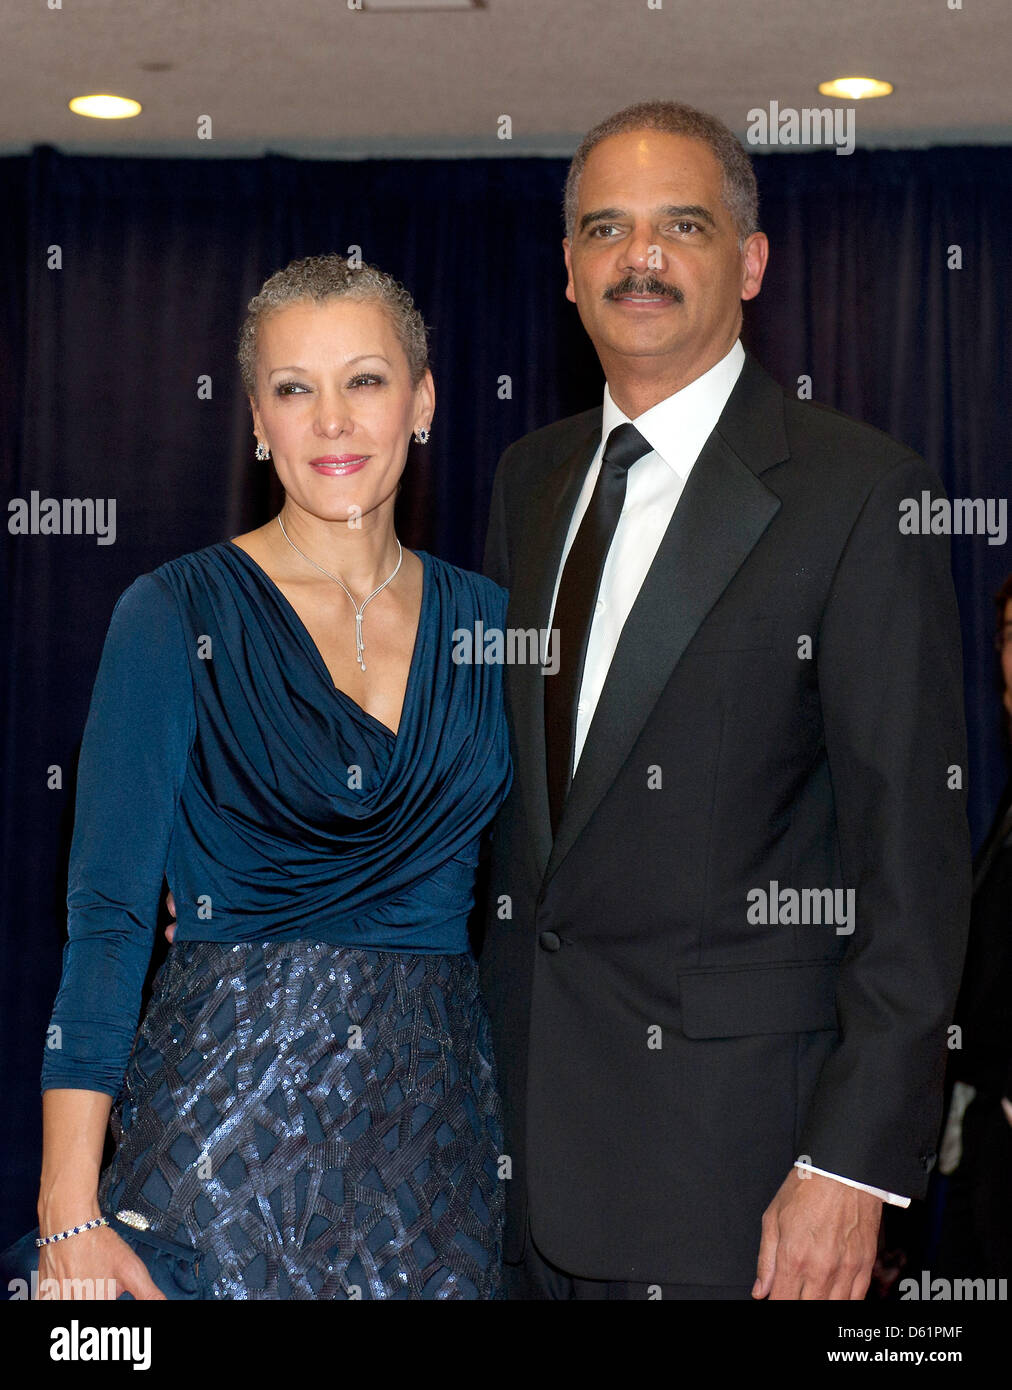 United States Attorney General Eric Holder and his wife Sharon Malone arrive for the 2012 White House Correspondents Association Dinner held at a hotel in Washington, DC, USA, on 28 April 2012. Photo: Ron Sachs / CNP (ATTENTION: Embargo until 4:00 PM EDT, Sunday, April 29, 2012 - NO New York or New Jersey Newspapers or newspapers within a 75 mile radius of New York City) Stock Photo